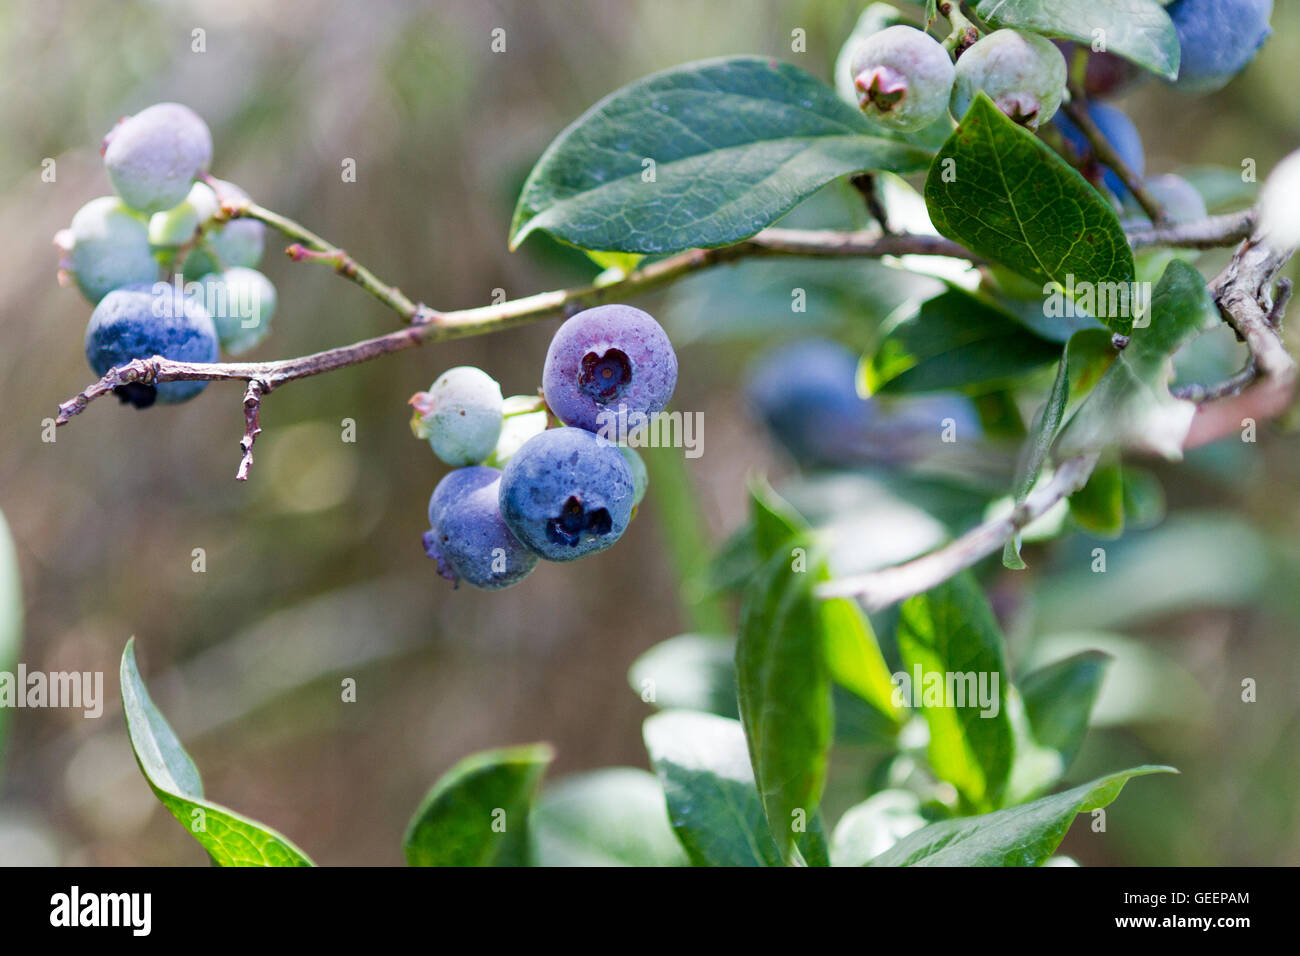 Blueberries ripen on the branch at blueberry farm Stock Photo